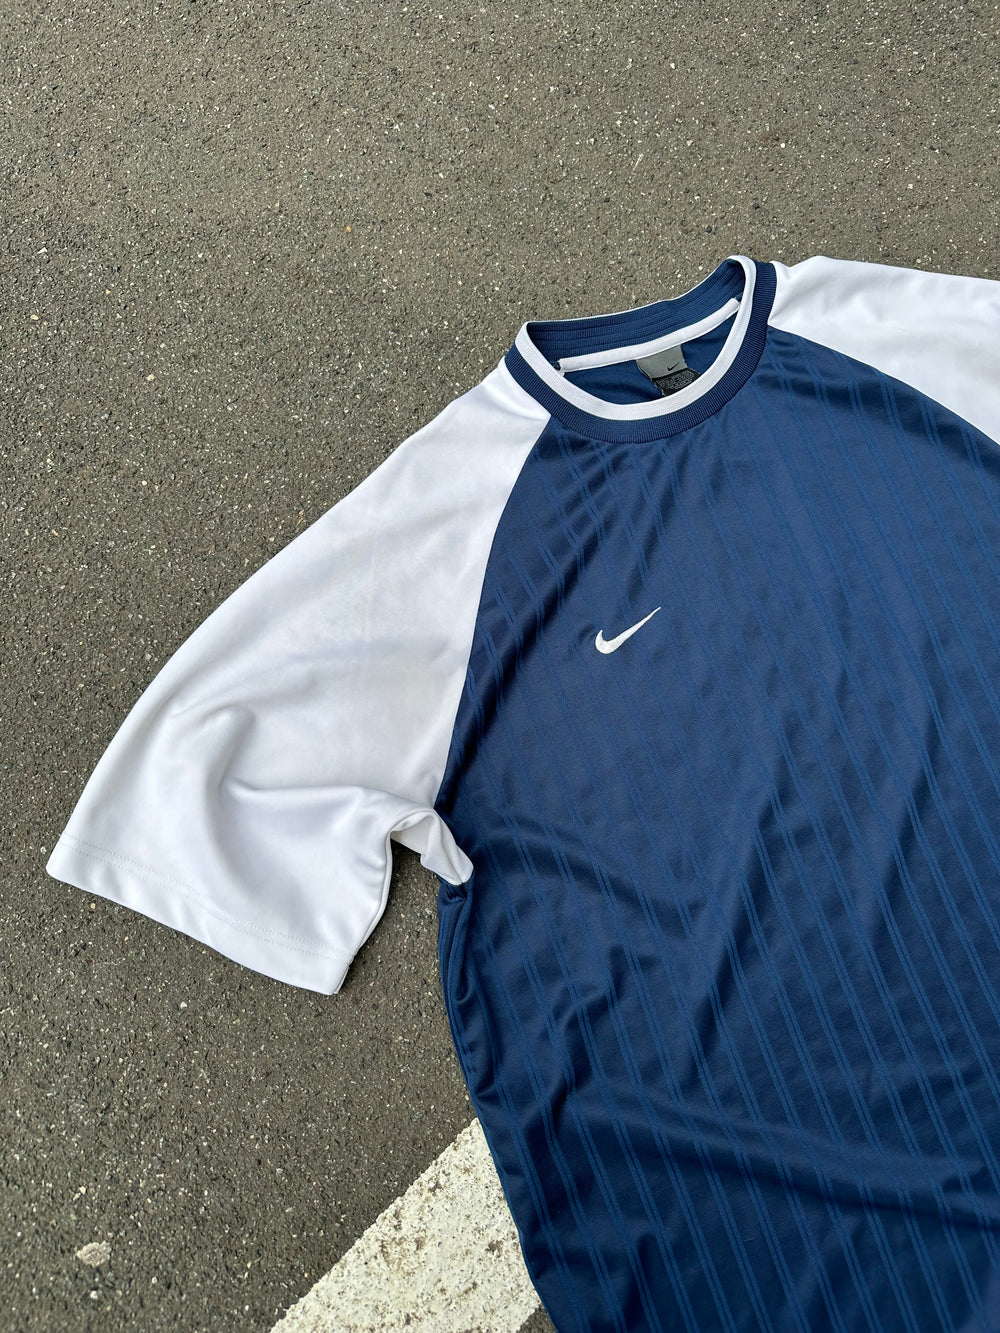 Early 2000s Nike Jersey (L)